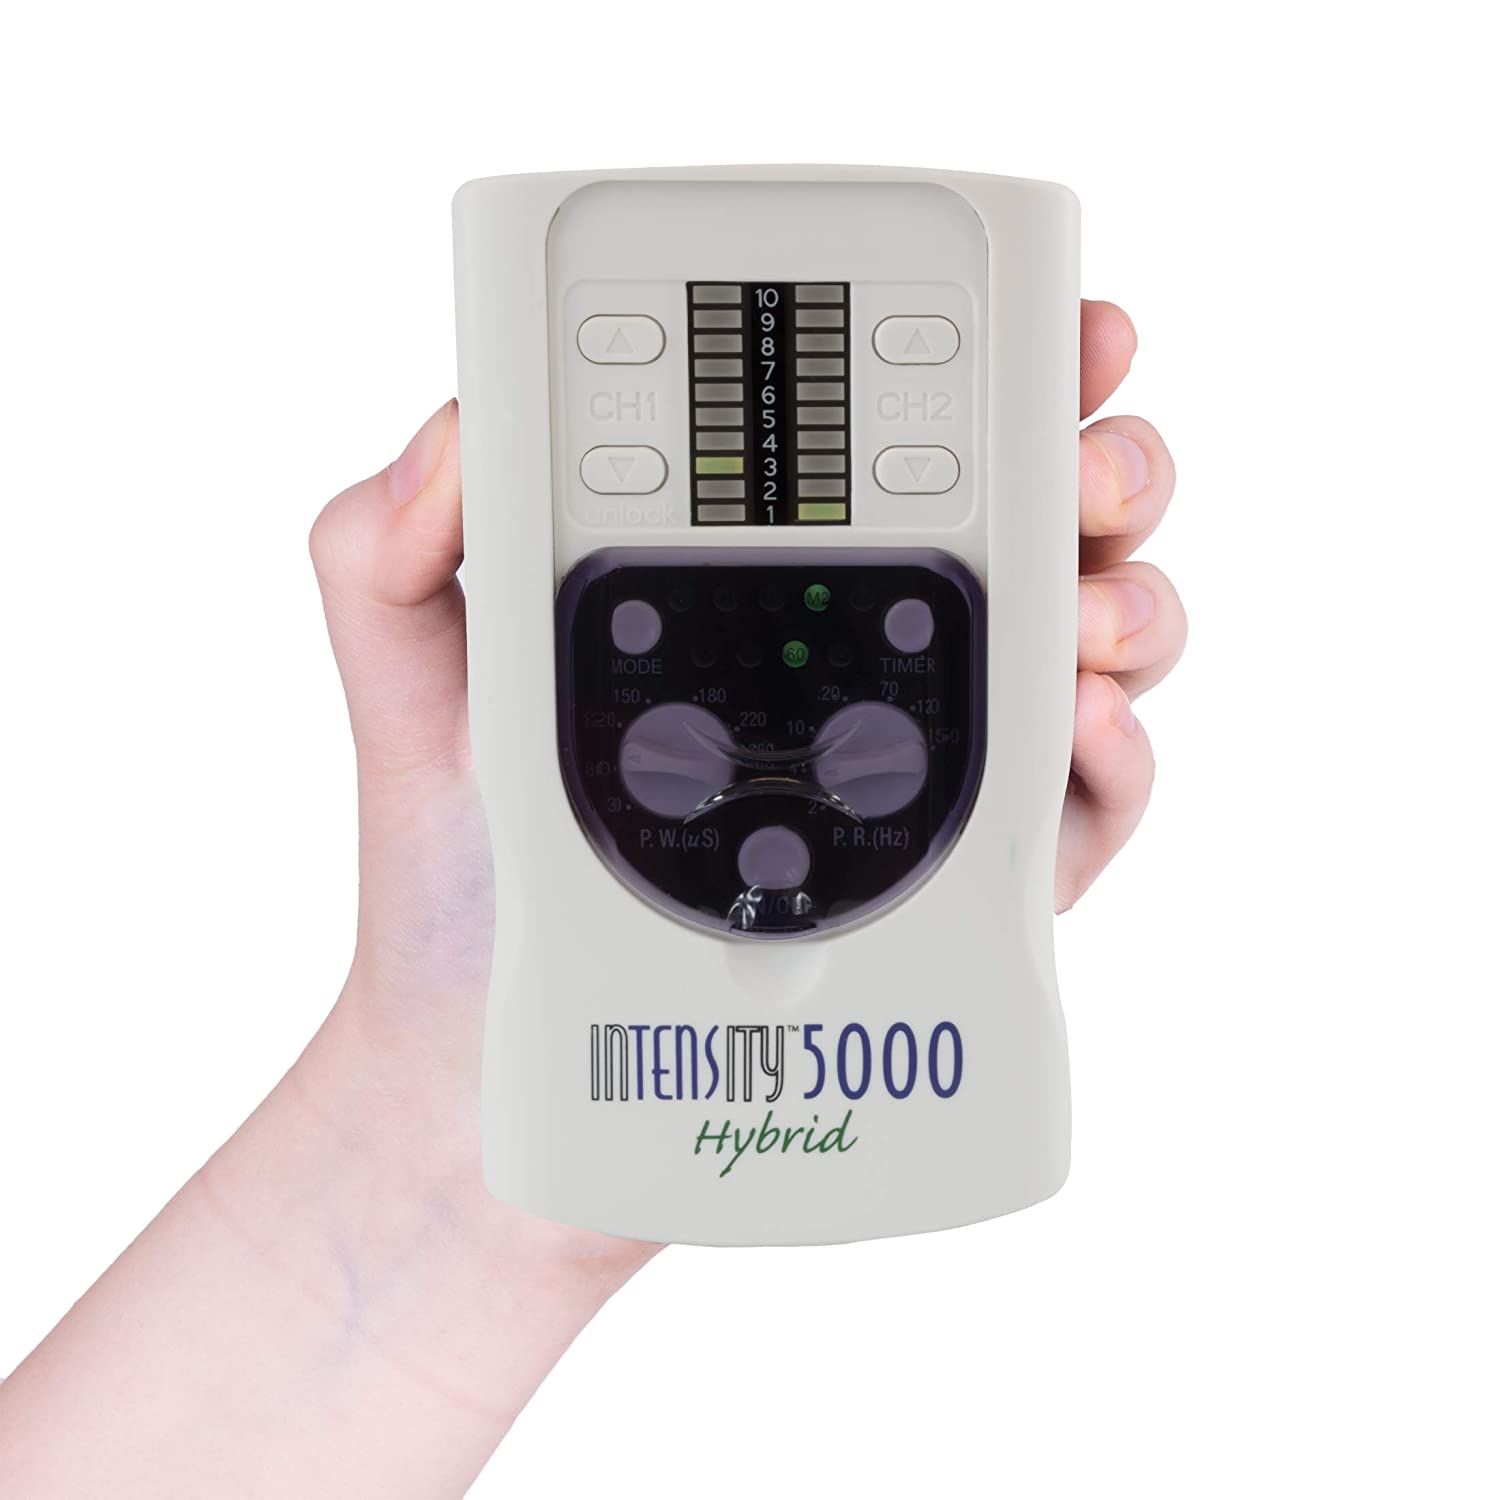 Intensity at Home TENS Unit Muscle Stimulator - Electric Pulse